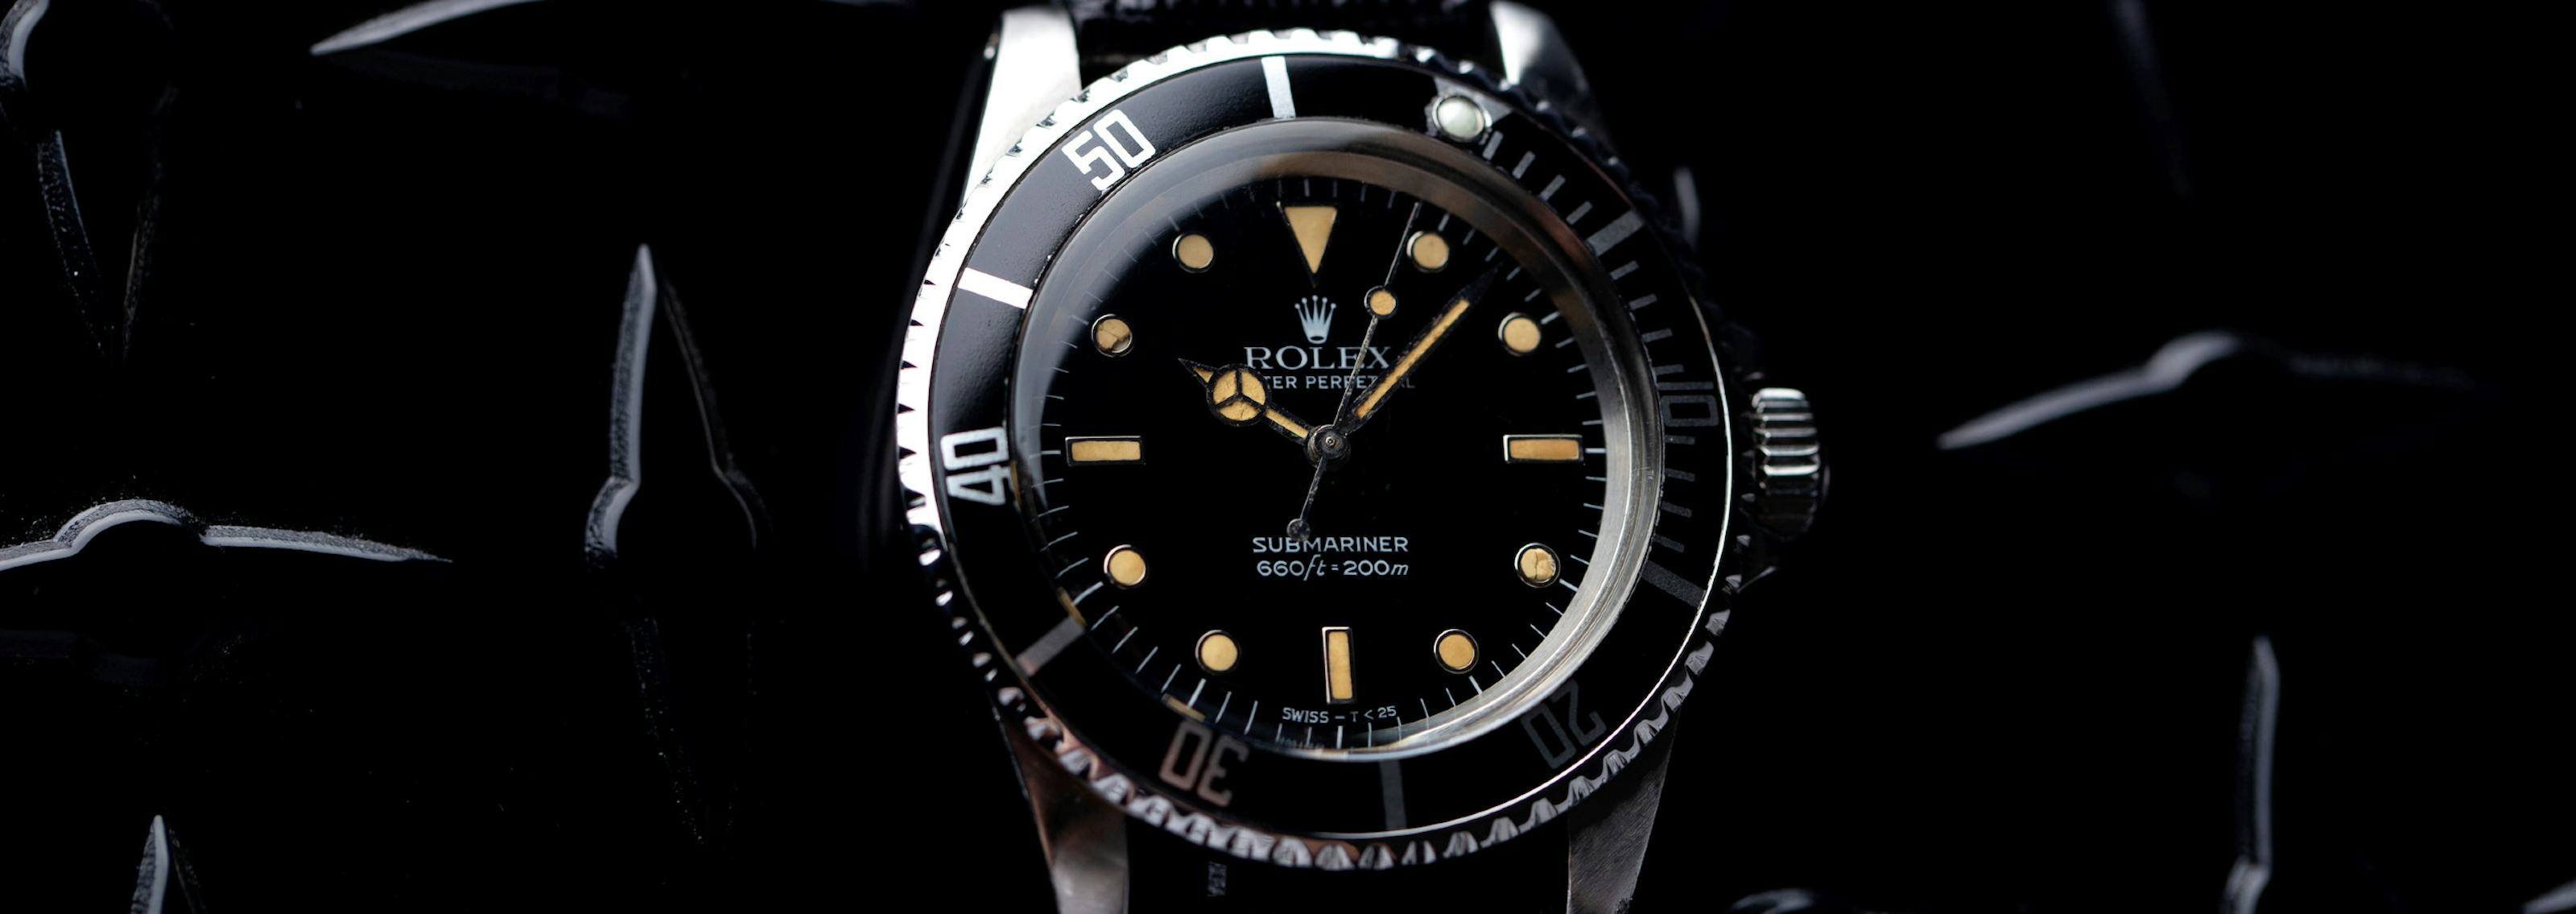 Everything You Need to Know About the Rolex Submariner